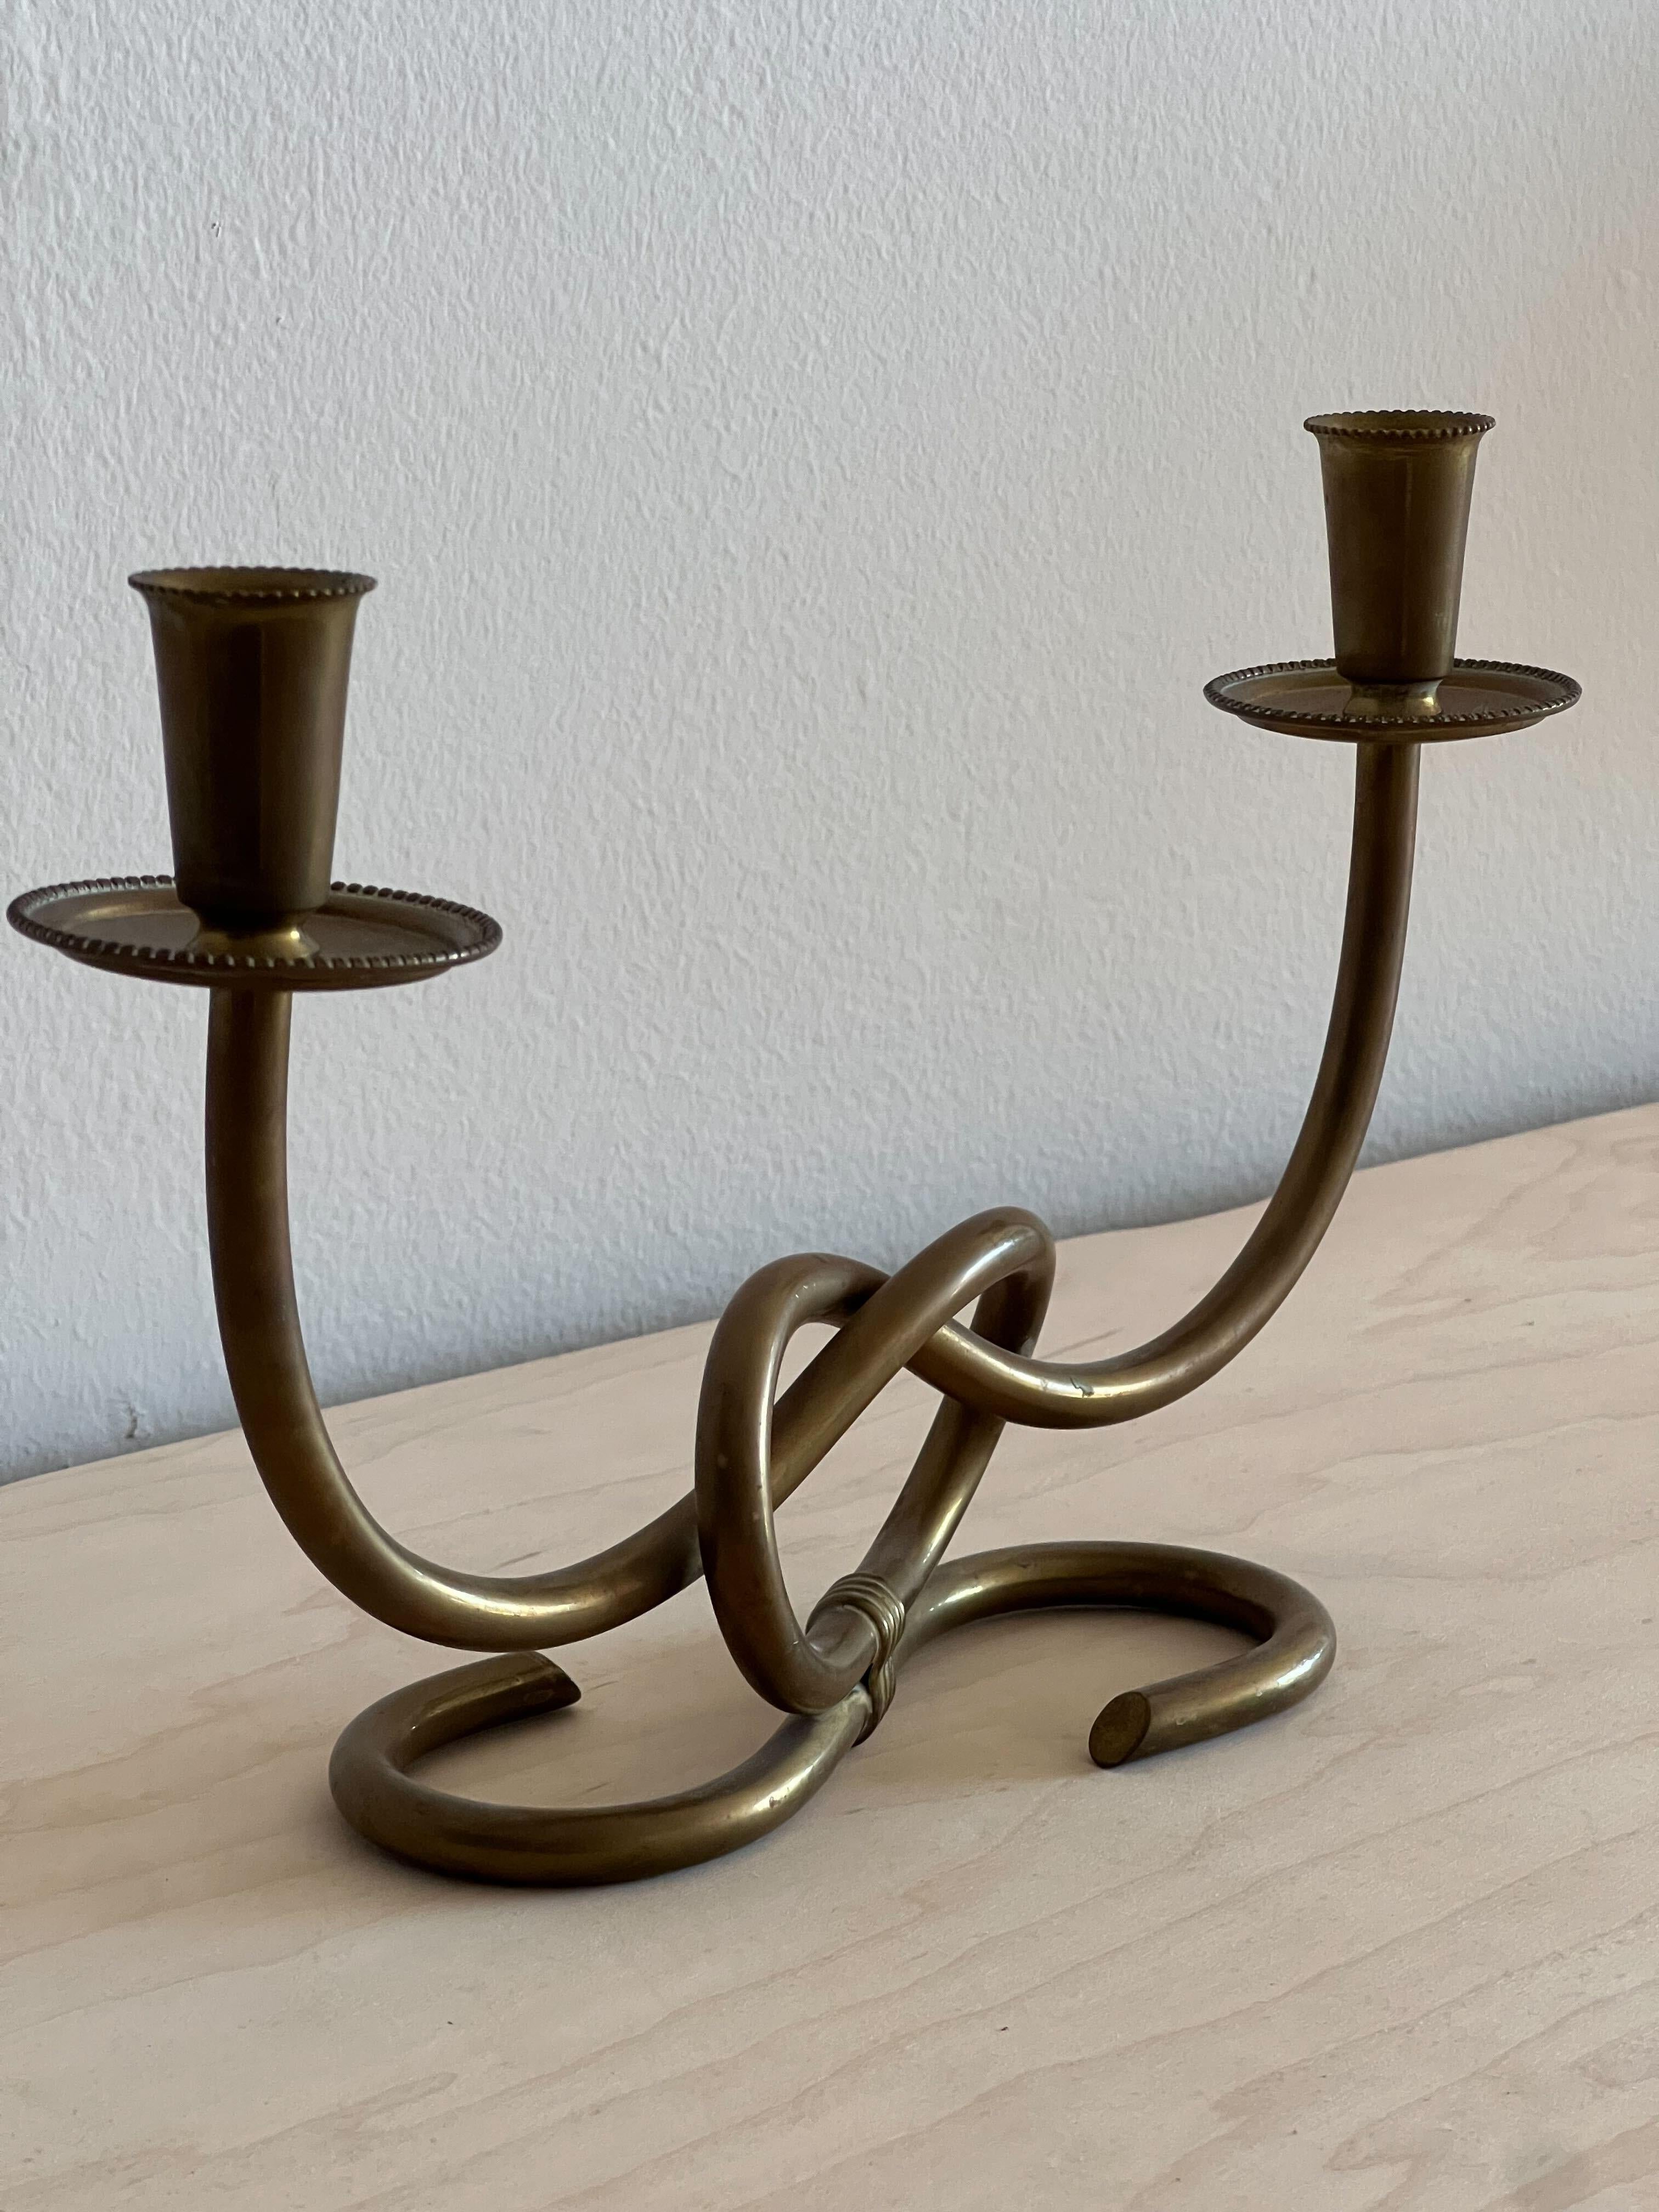 An organic brass candle holder or candelabra, designed and produced in Italy, 1940s.